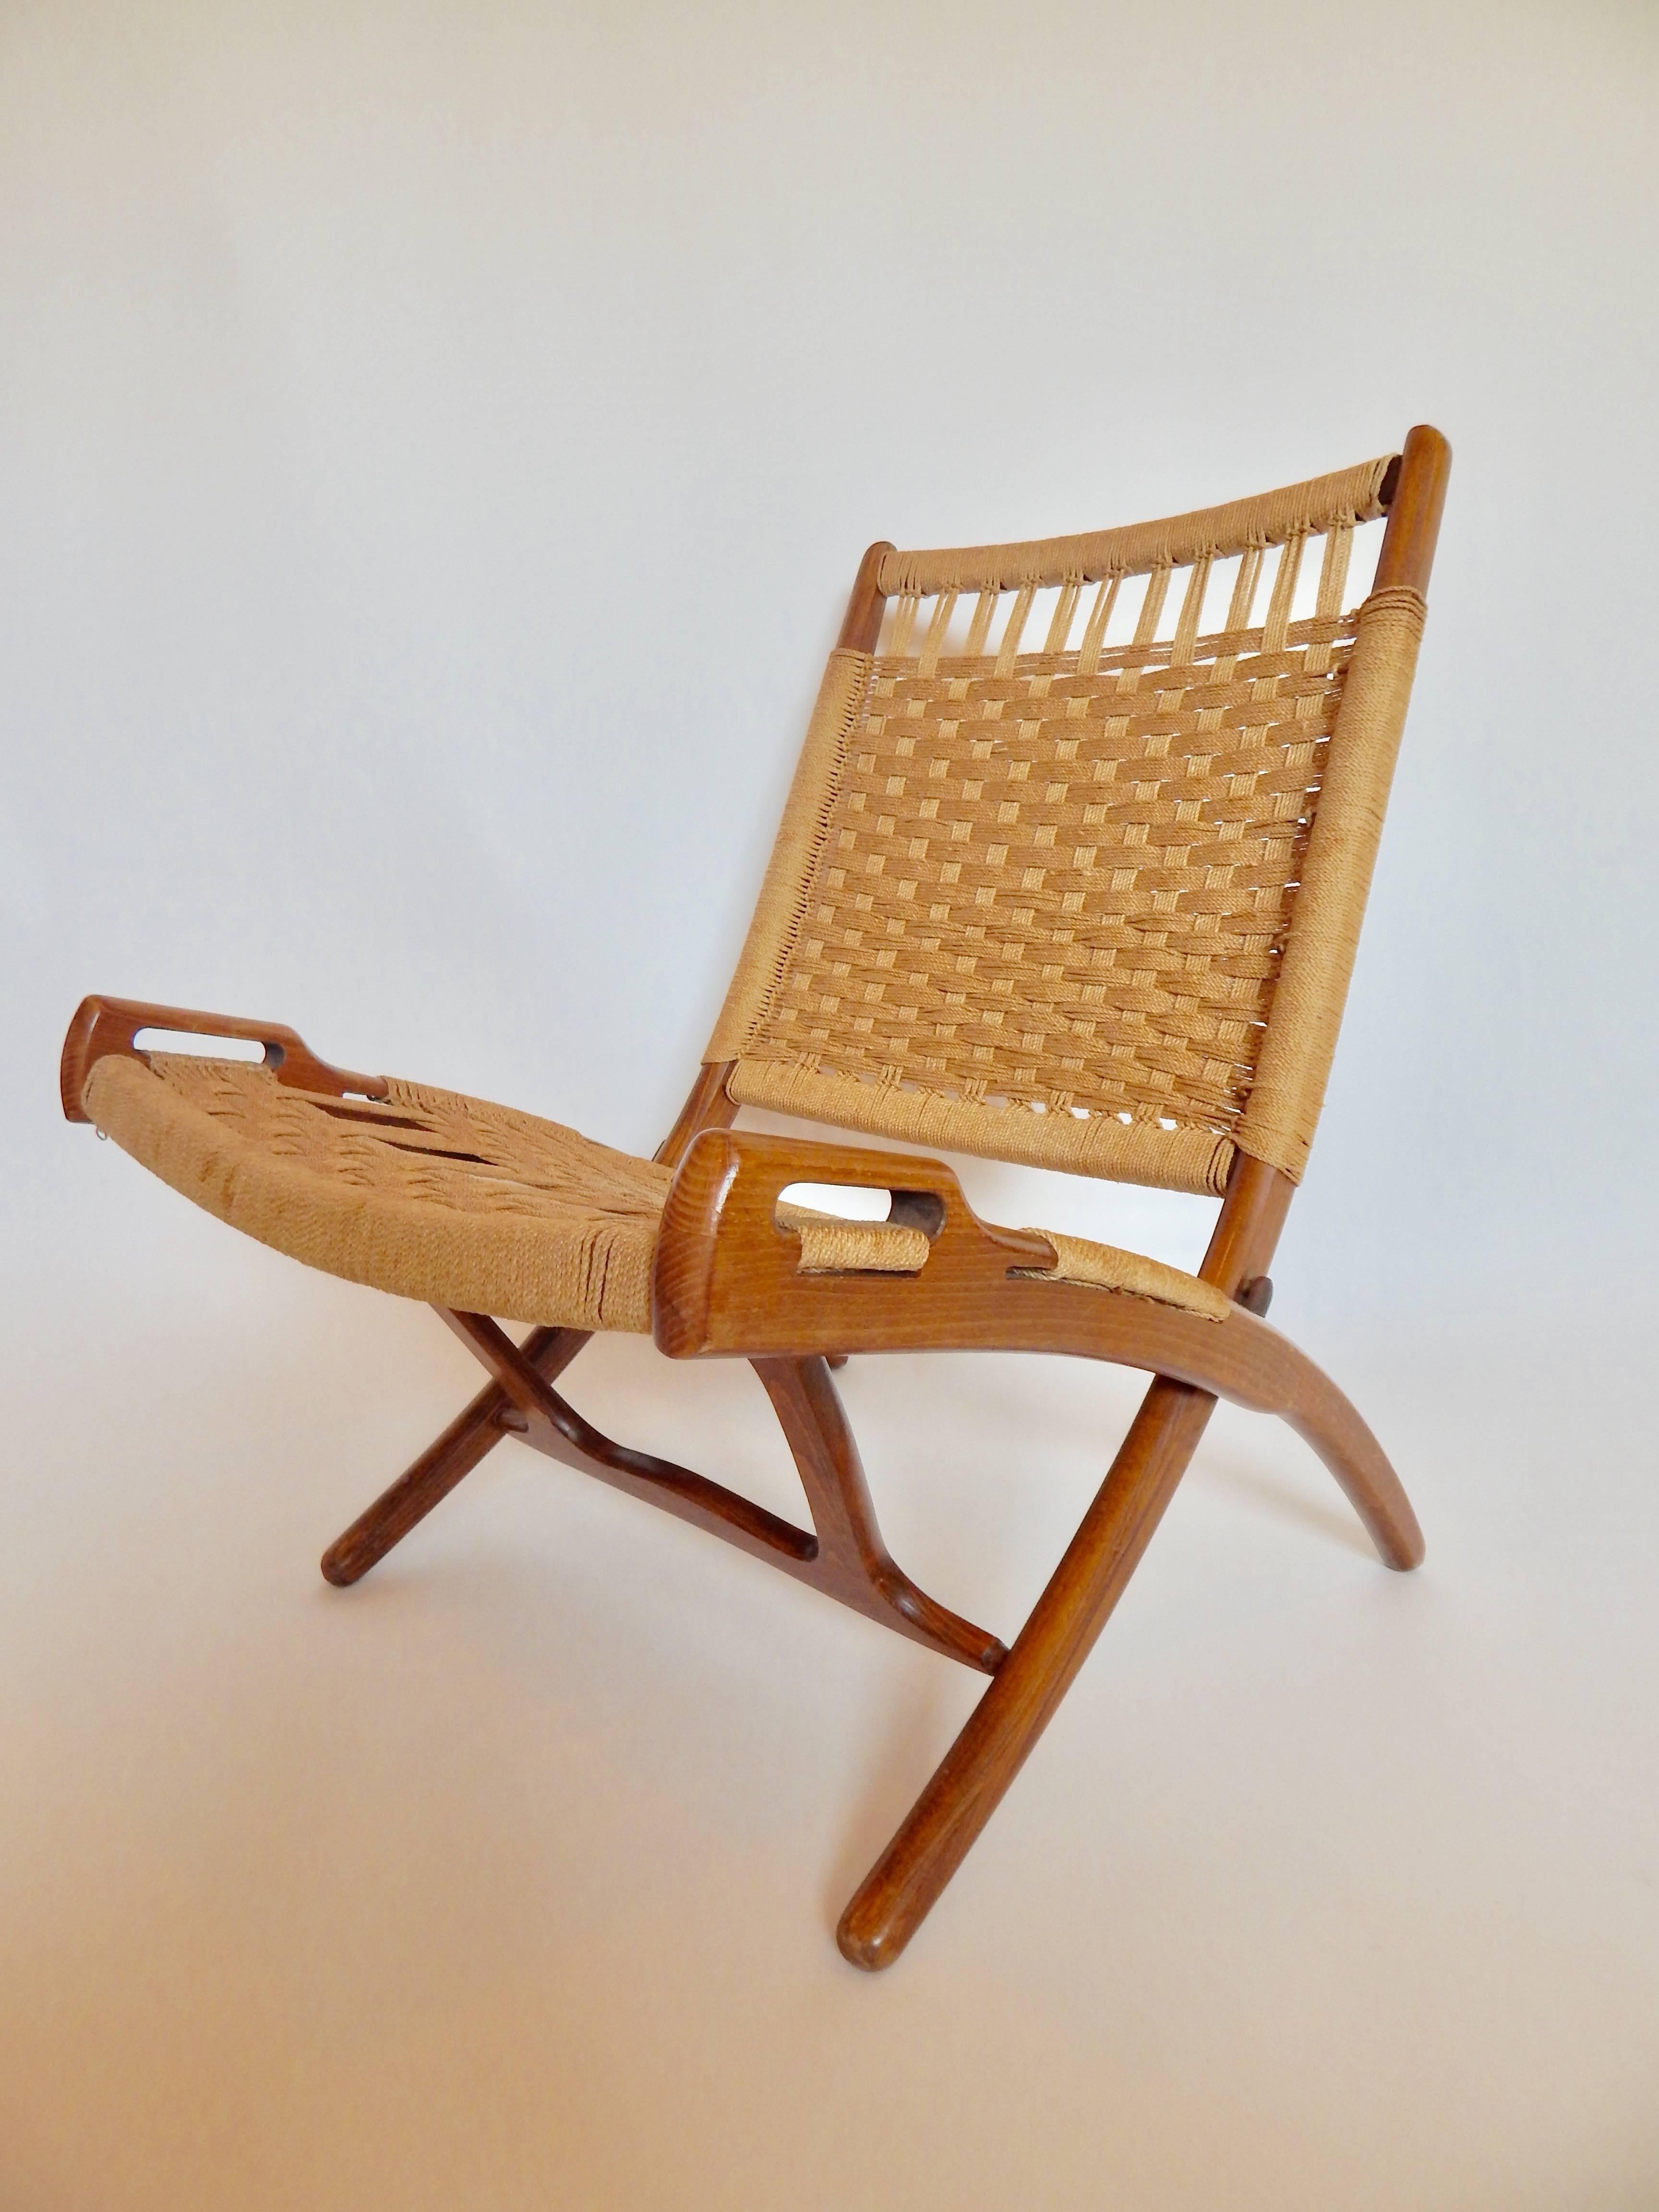 Mid-Century 1960s Hans Wegner style folding chair with handles. Weaving is intact and in excellent condition with exception of exhibiting some very minor wear.  Wood Frame is in excellent structural condition.
If you are in NYC / surrounding areas